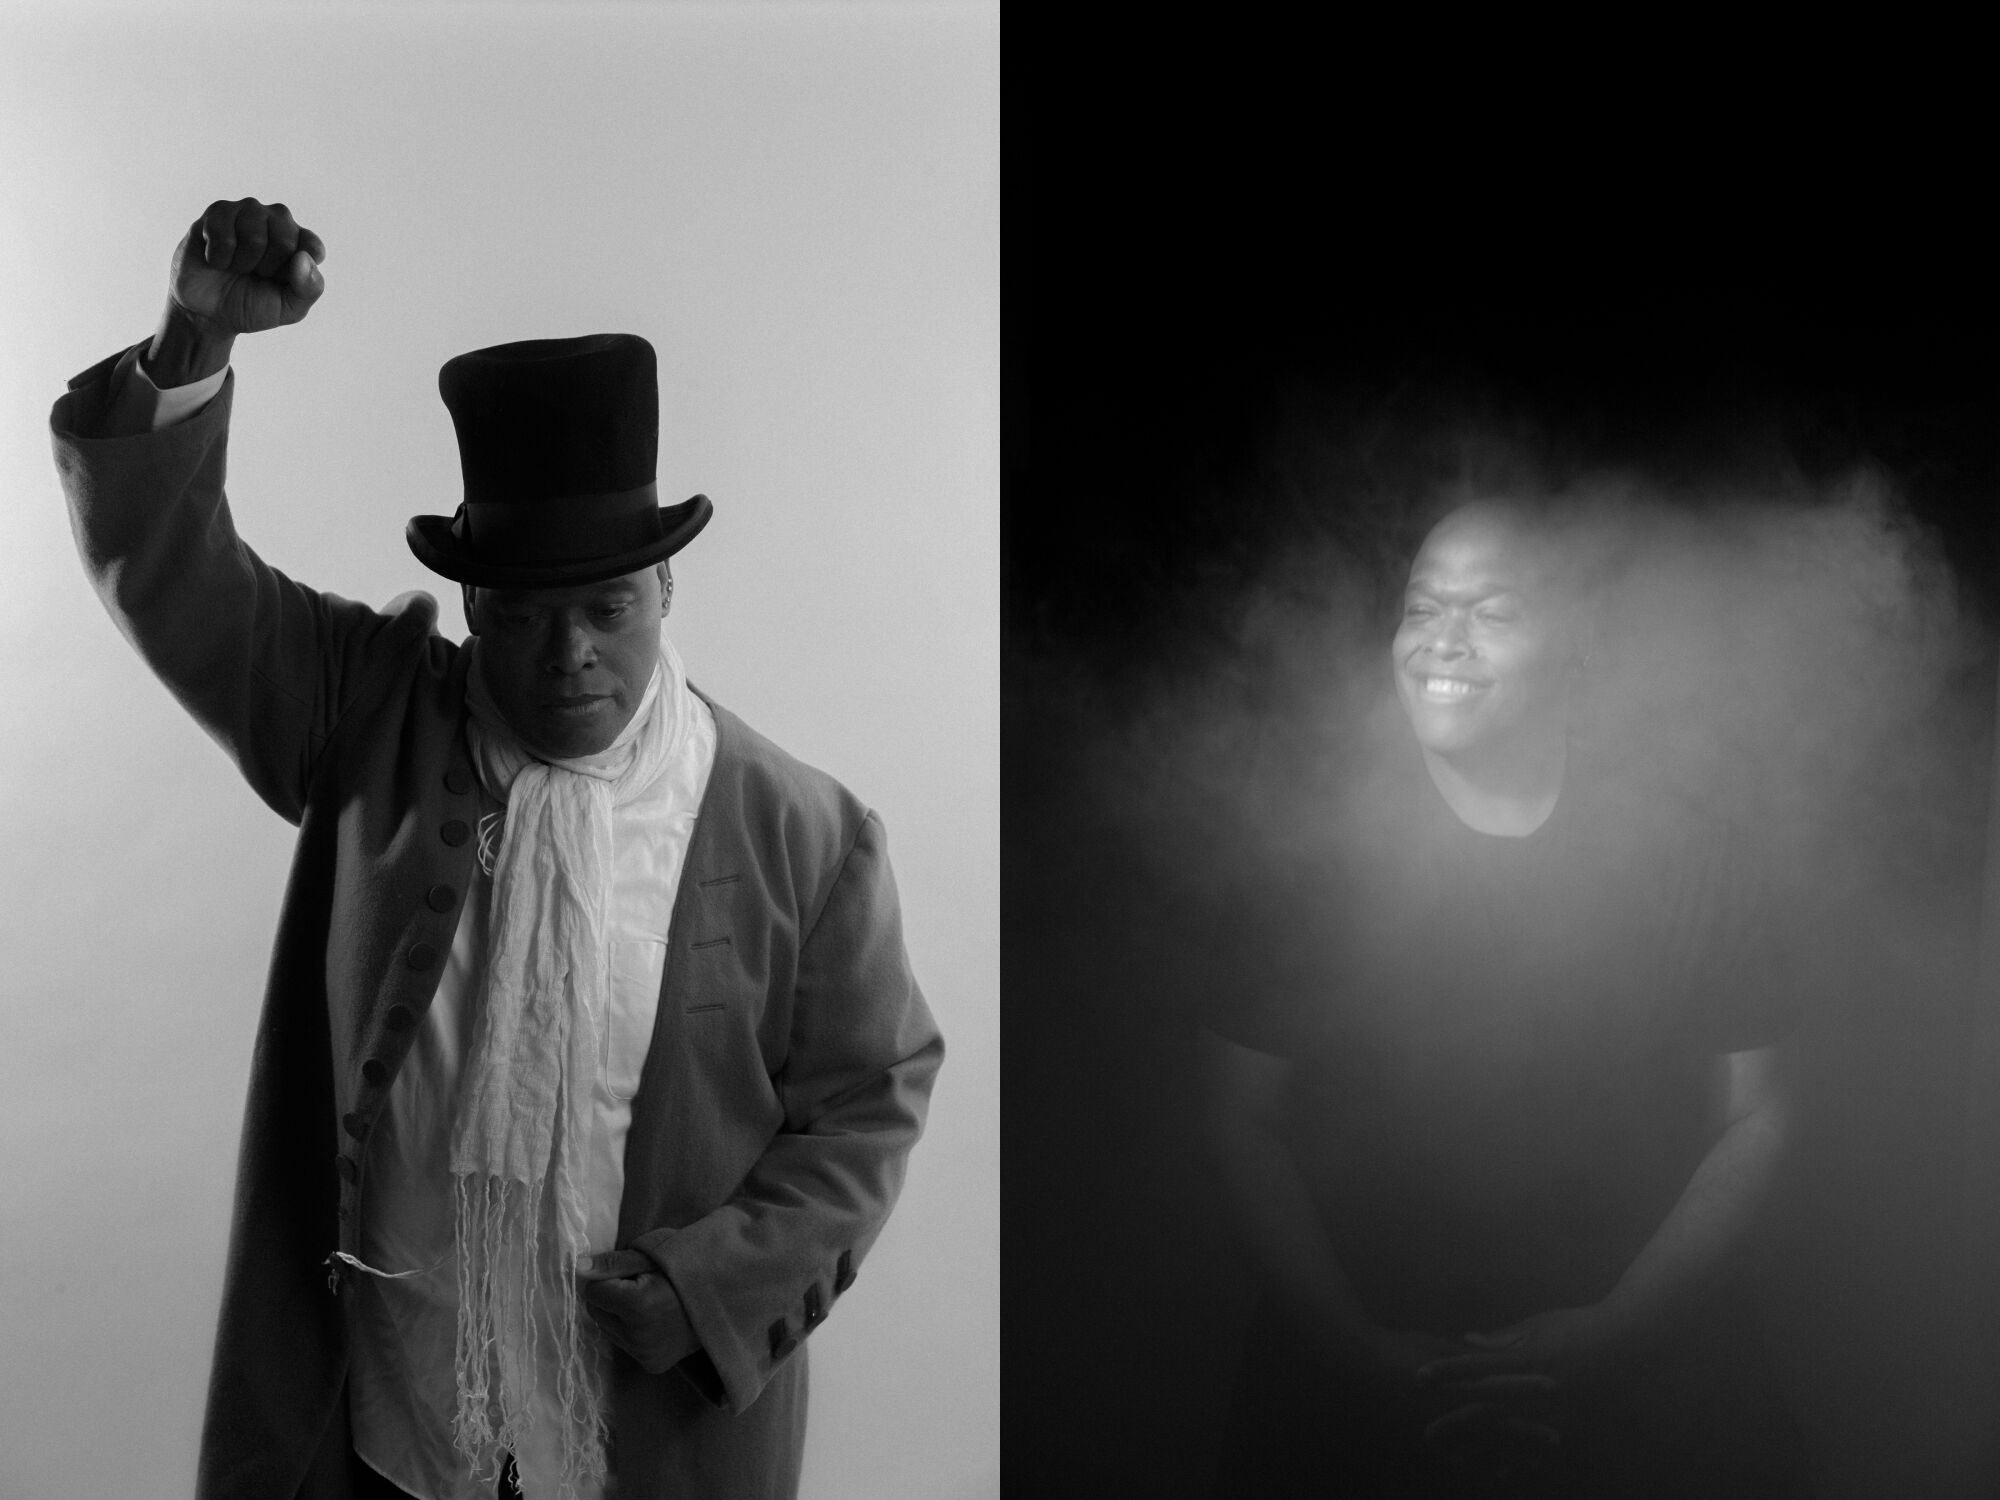 A split image shows a man in a top hat raising his fist, left, and smiling surrounded by mist, right.